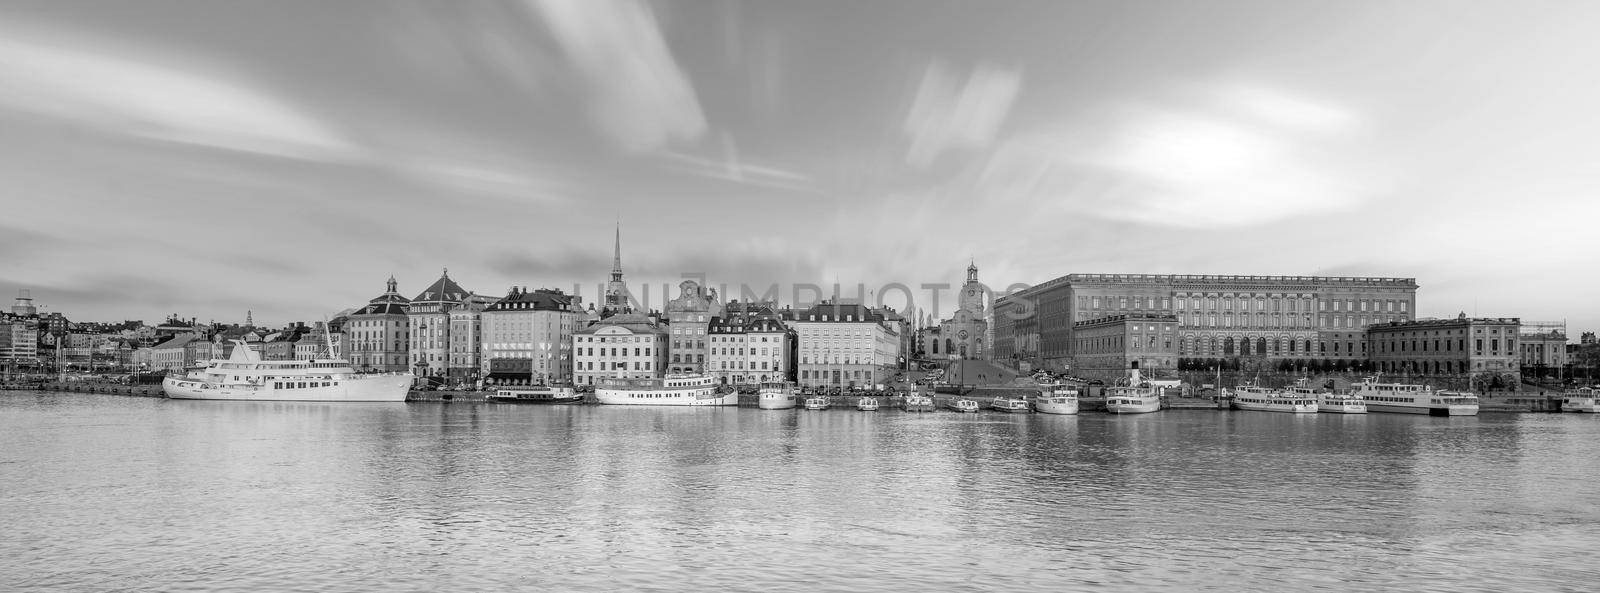 Stockholm old town city skyline, cityscape of Sweden by f11photo